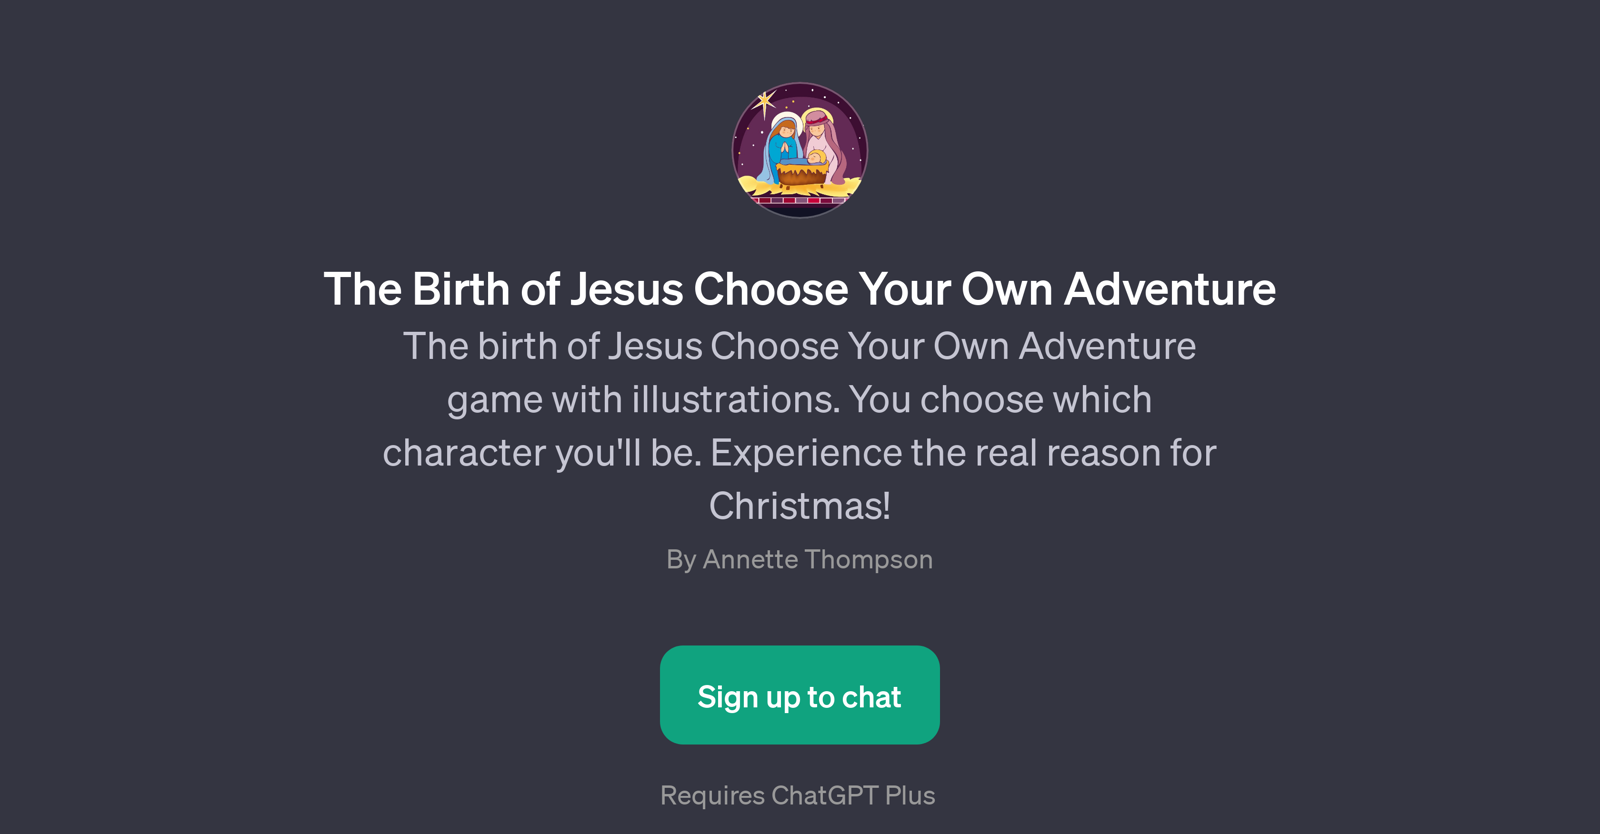 The Birth of Jesus Choose Your Own Adventure website